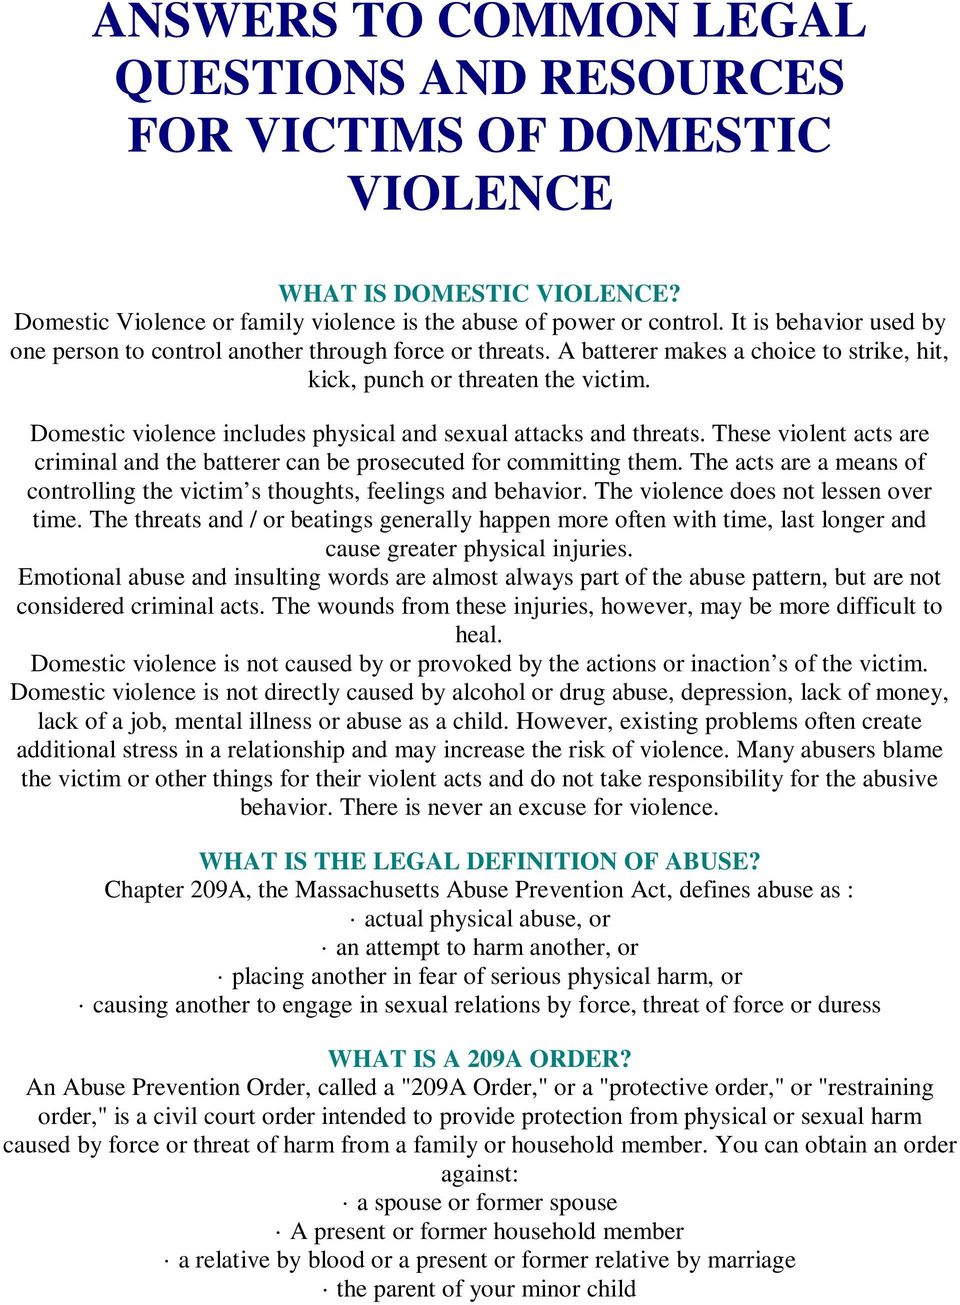 Domestic violence includes physical and sexual attacks and threats. These violent acts are criminal and the batterer can be prosecuted for committing them.